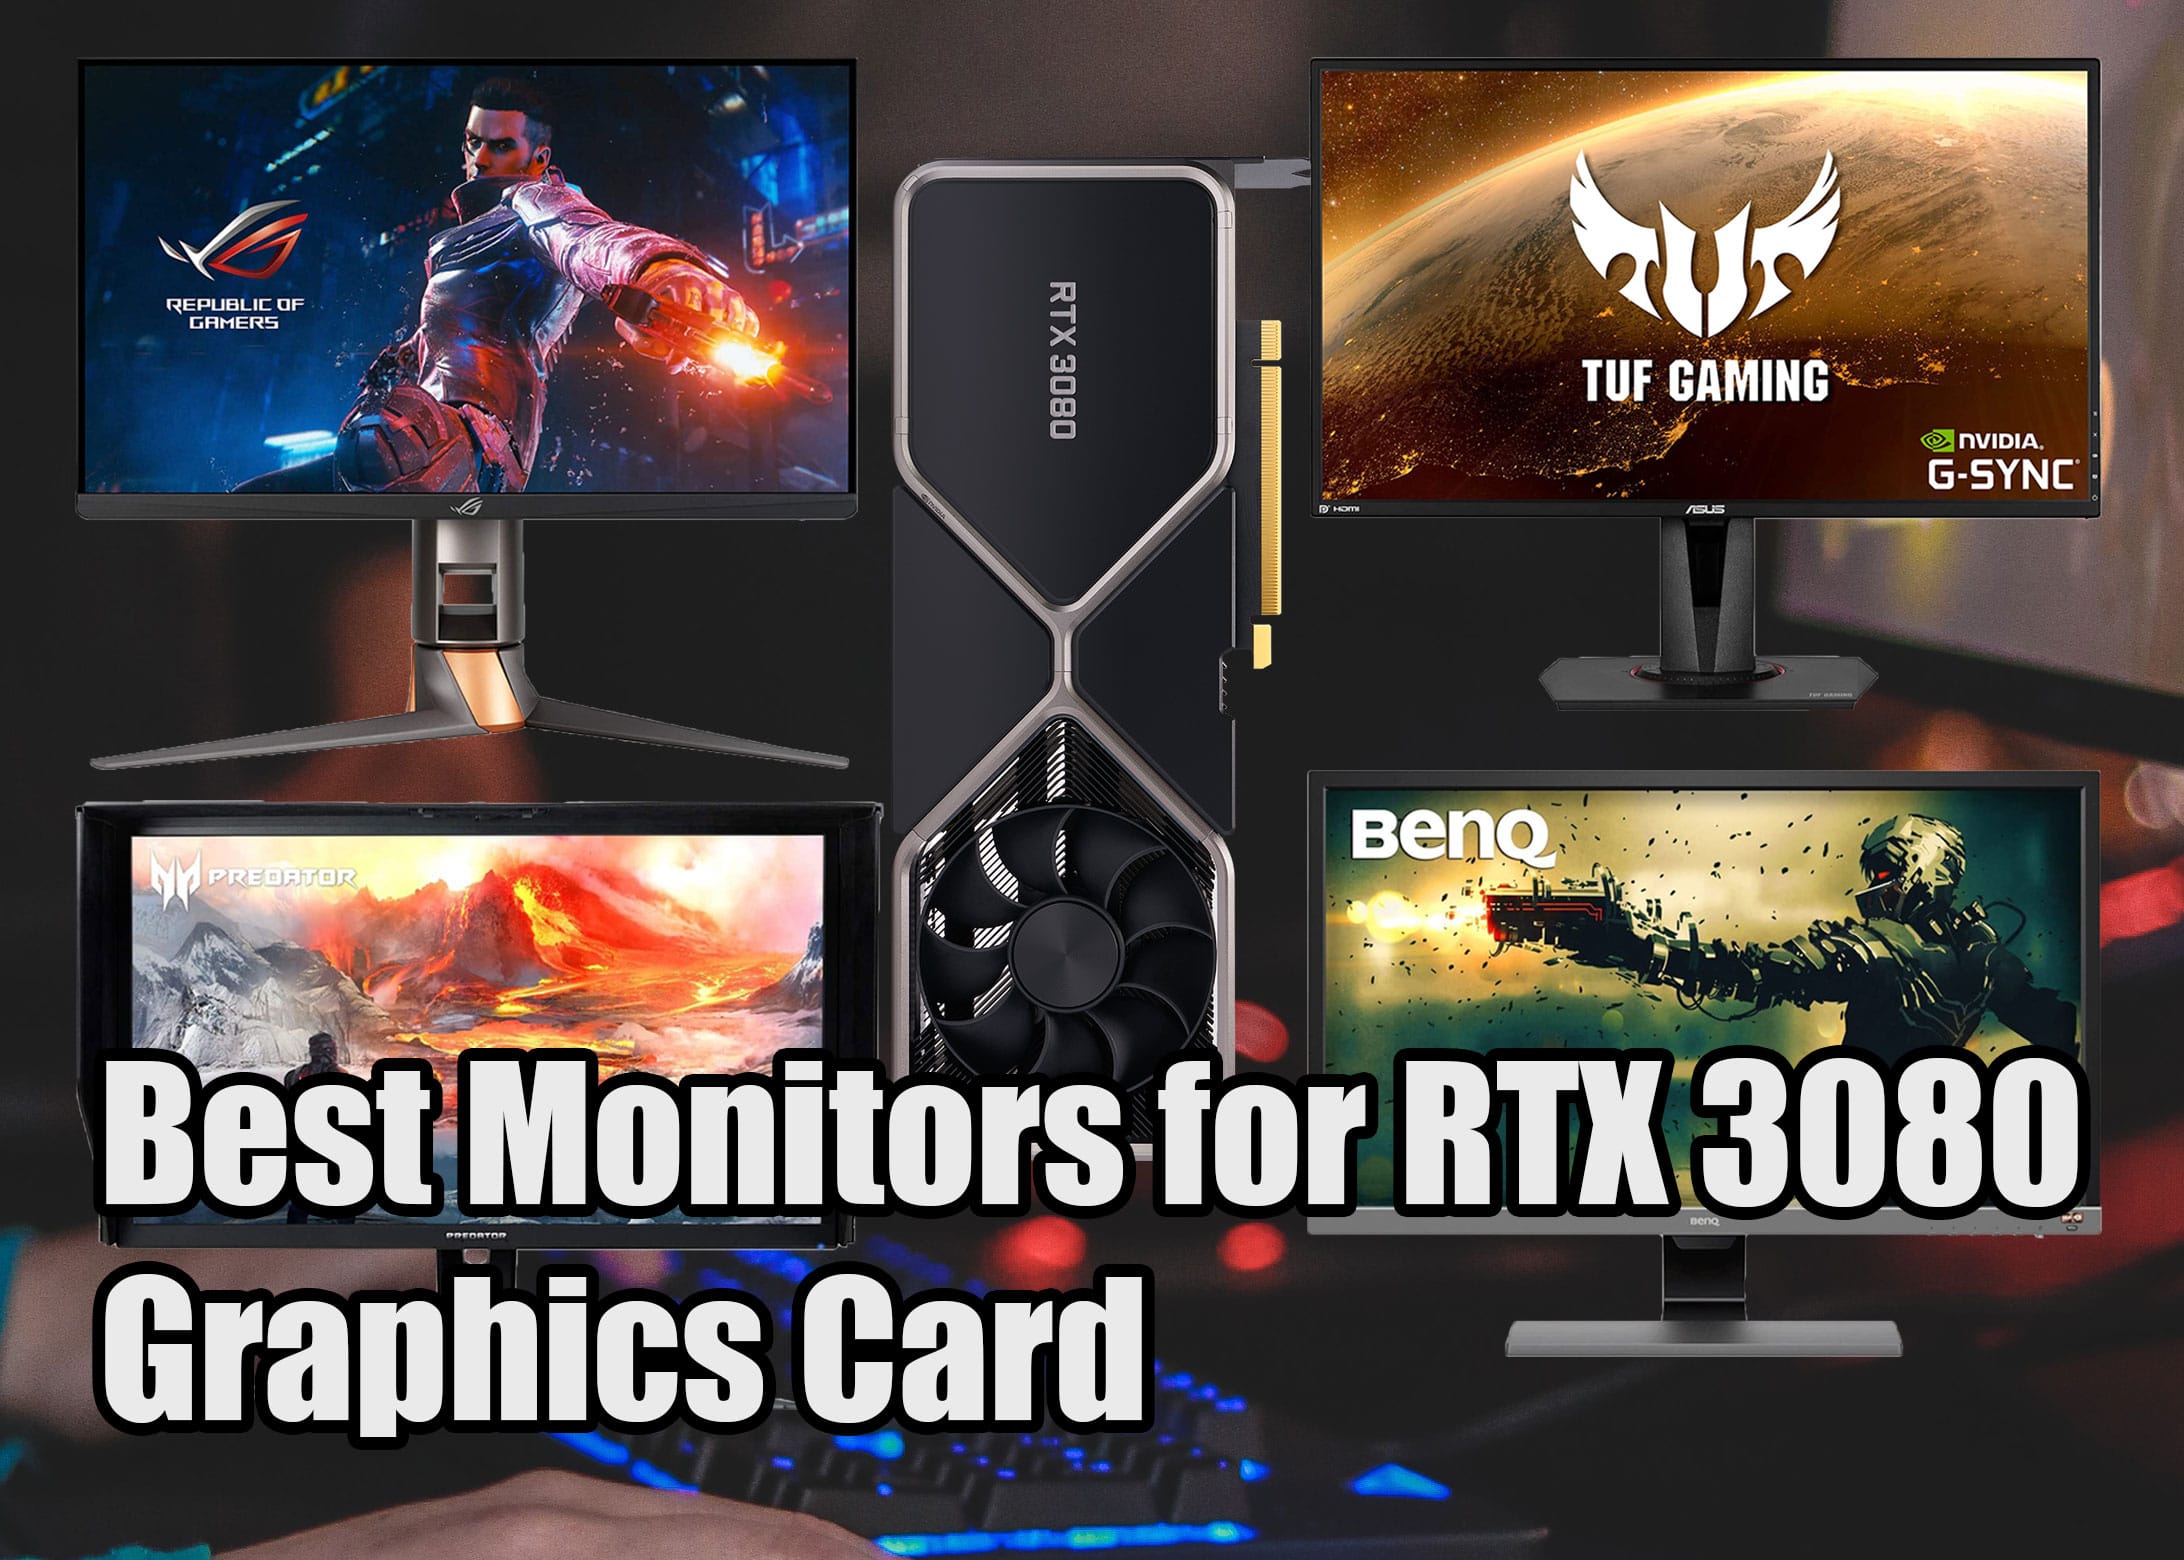 Best Monitors for RTX 3080